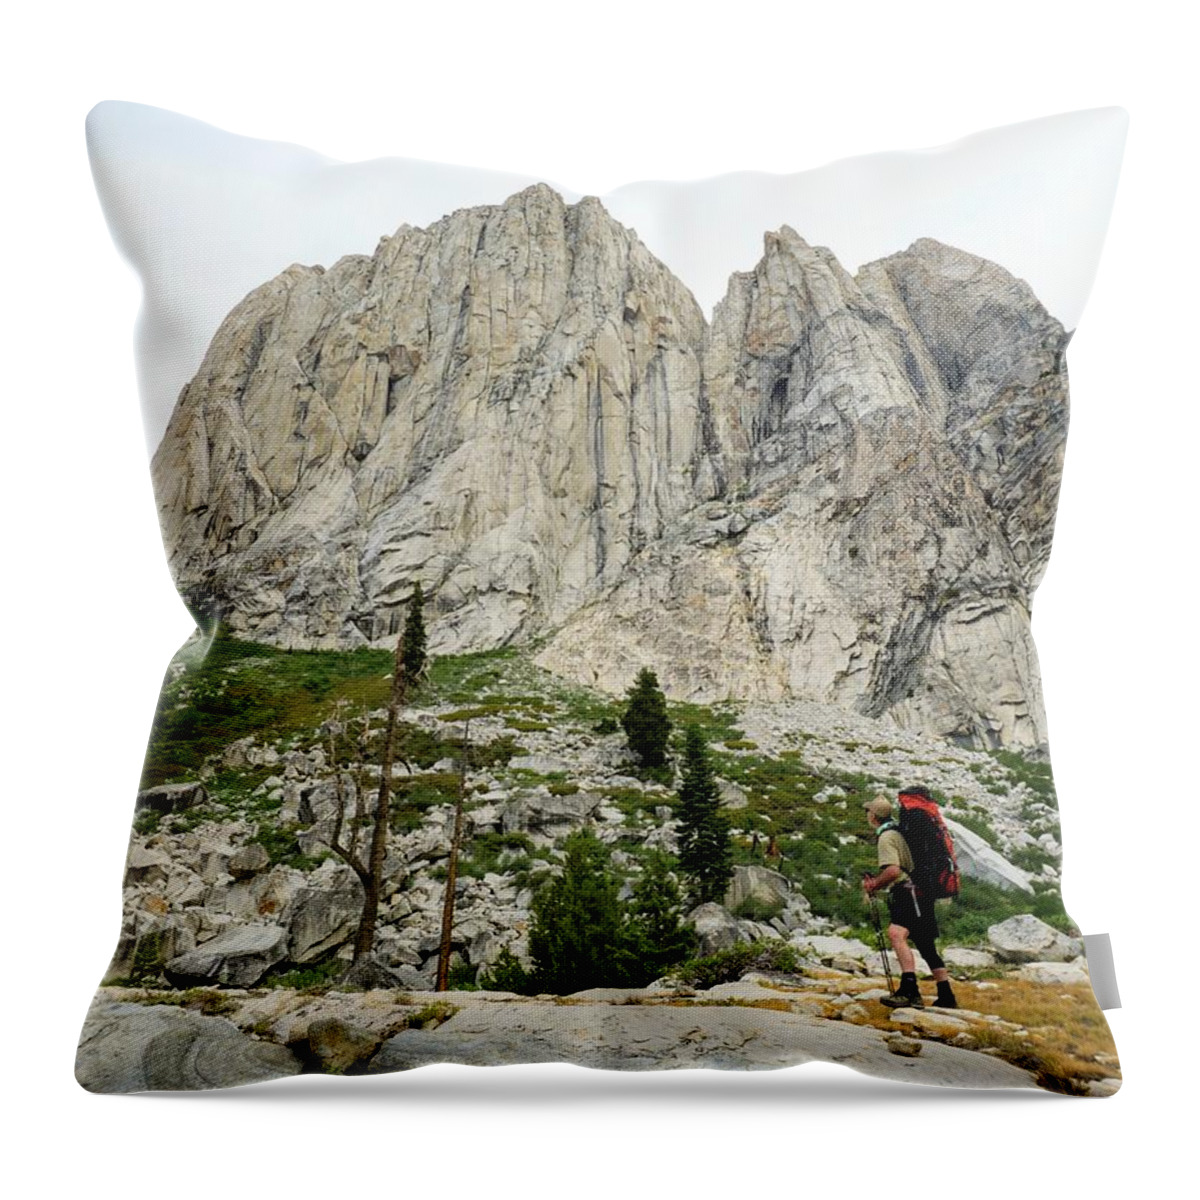 Angels Wings Throw Pillow featuring the photograph Wonders Await by Brett Harvey